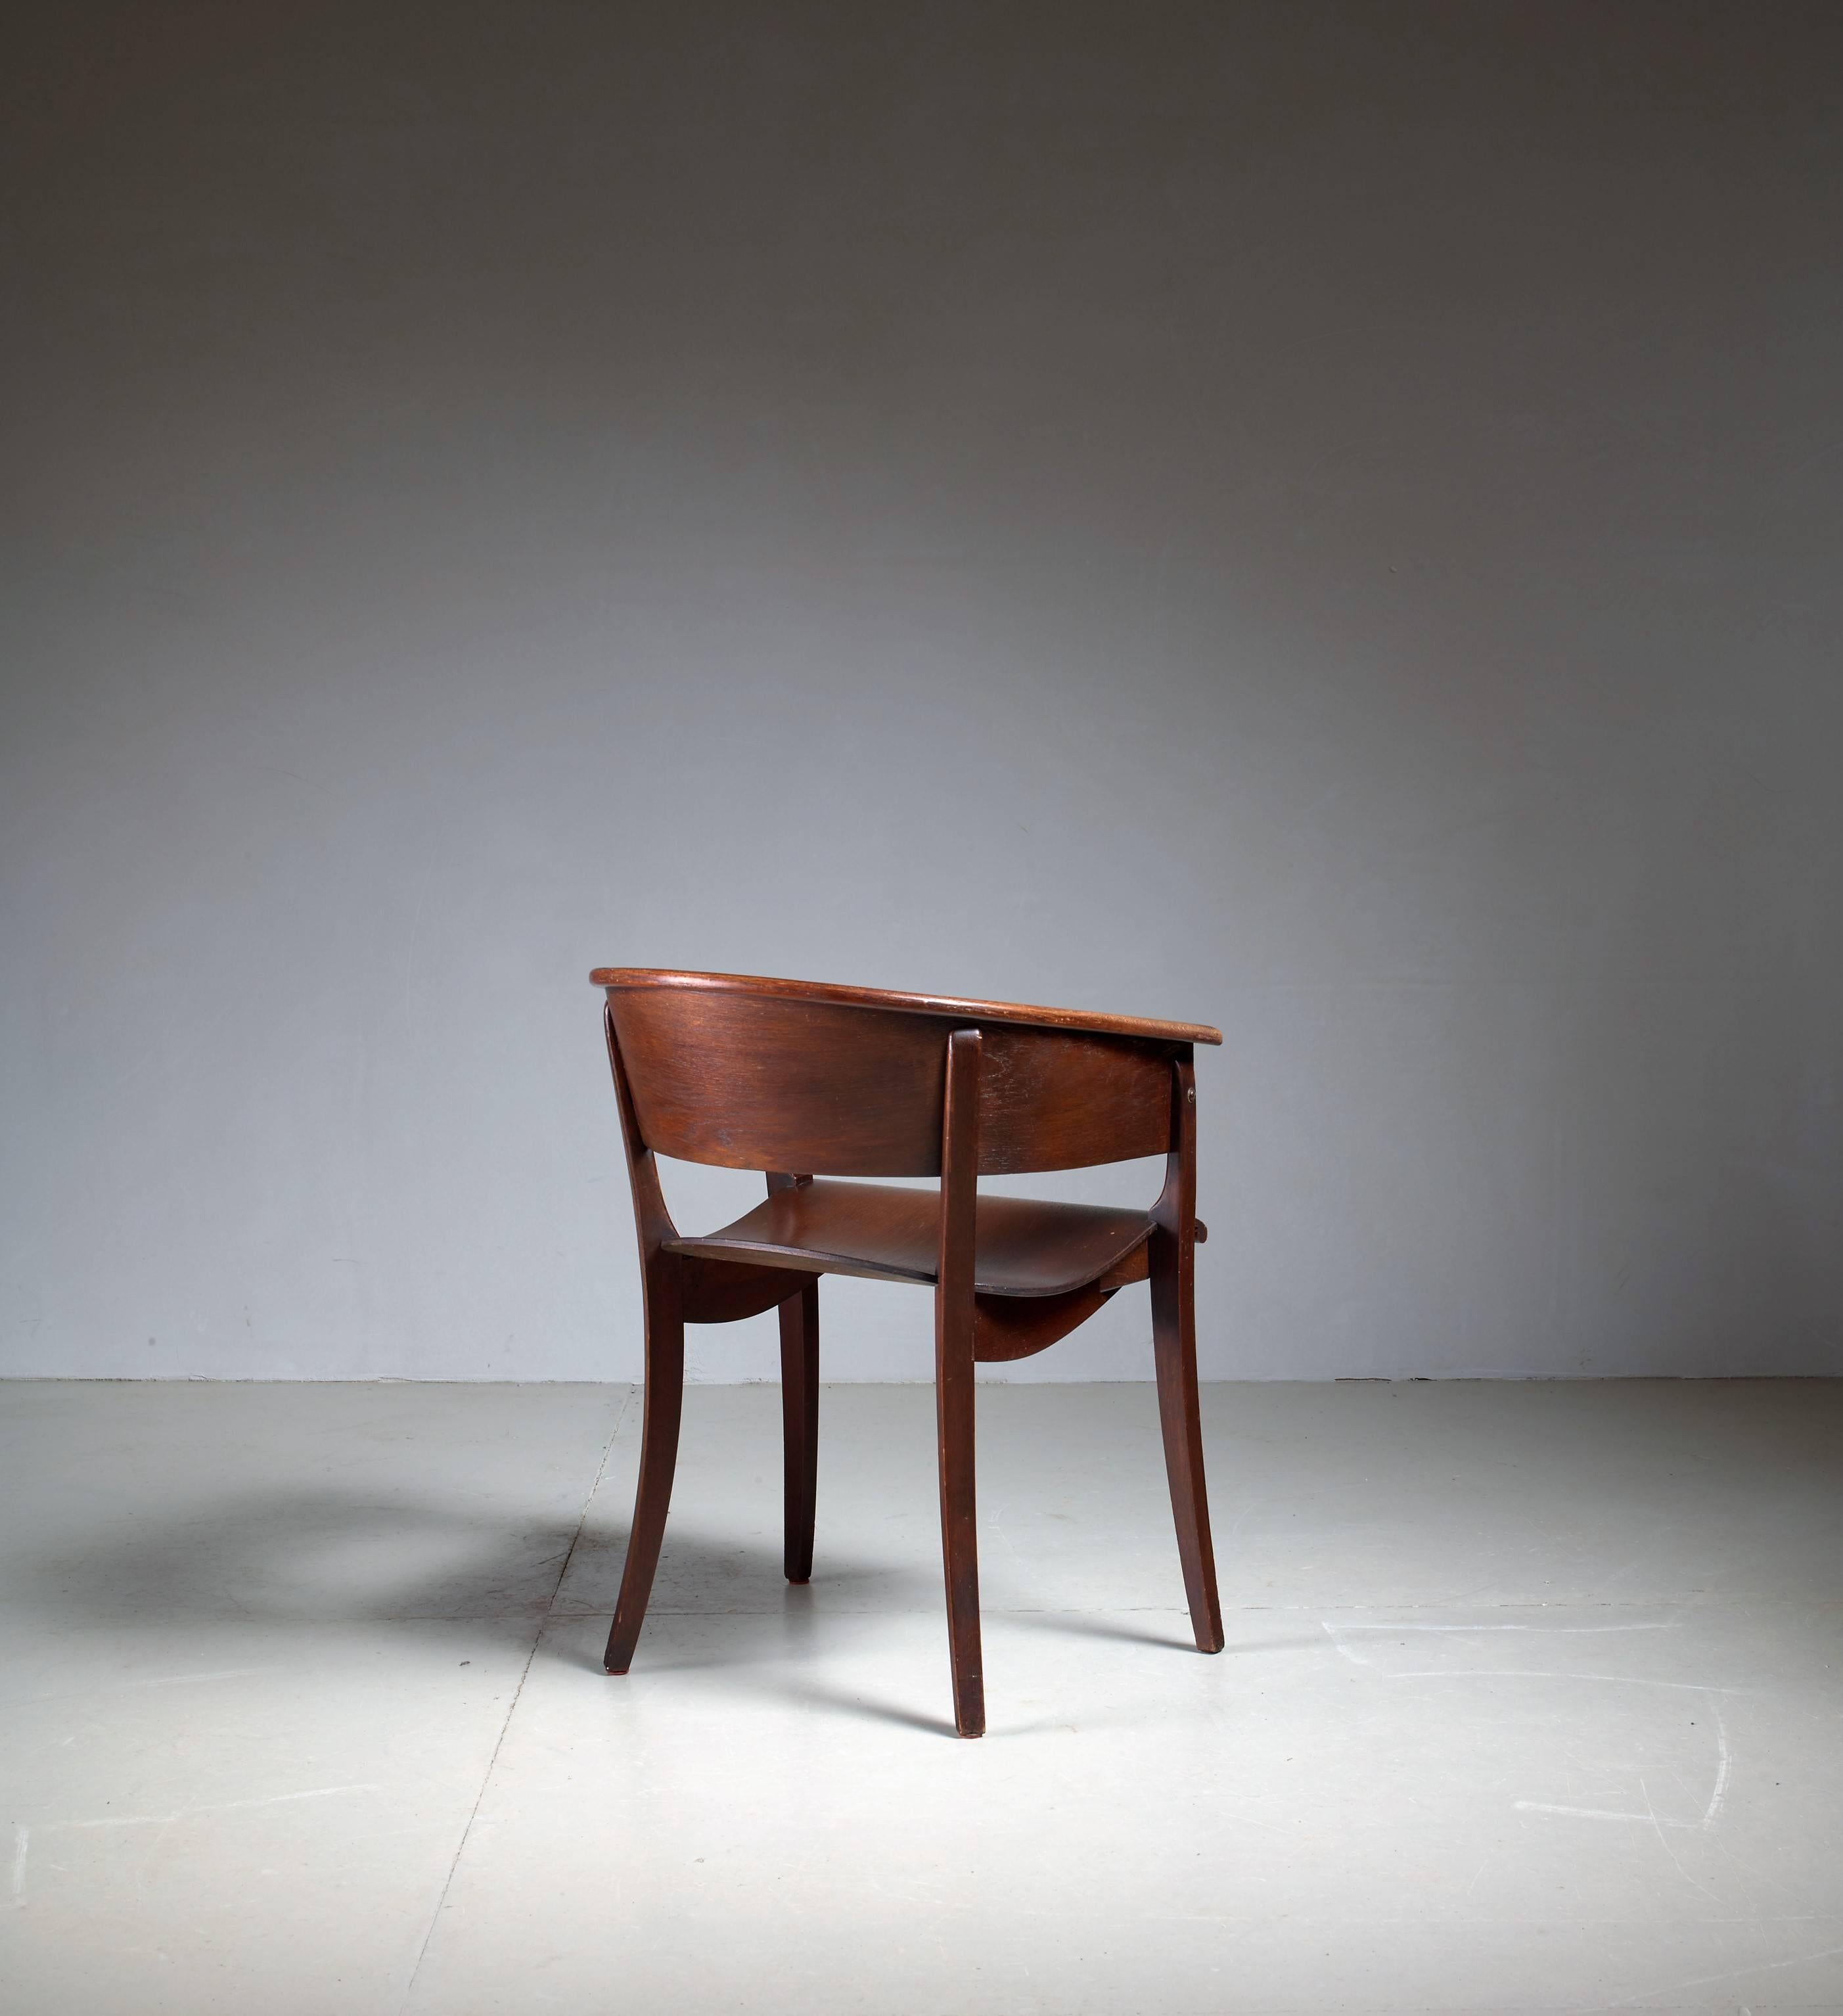 Ernst Rockhausen Bauhaus Style Plywood and Oak Chair, Germany, circa 1928 For Sale 1